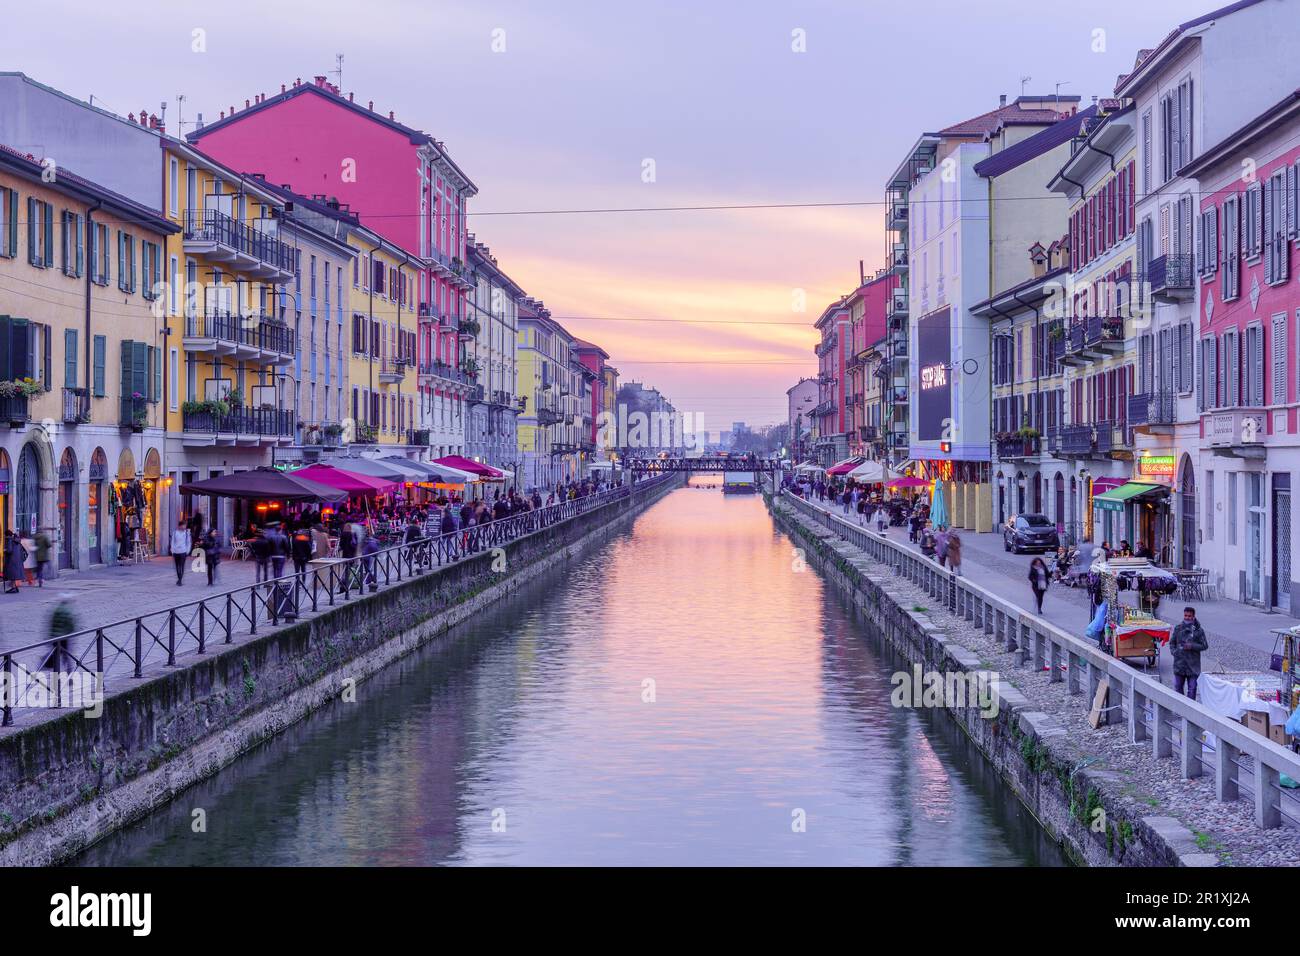 Milan, Italy - March 02, 2022: Sunset view of the Naviglio Grande canal, with locals and visitors, in Navigli, Milan, Lombardy, Northern Italy Stock Photo